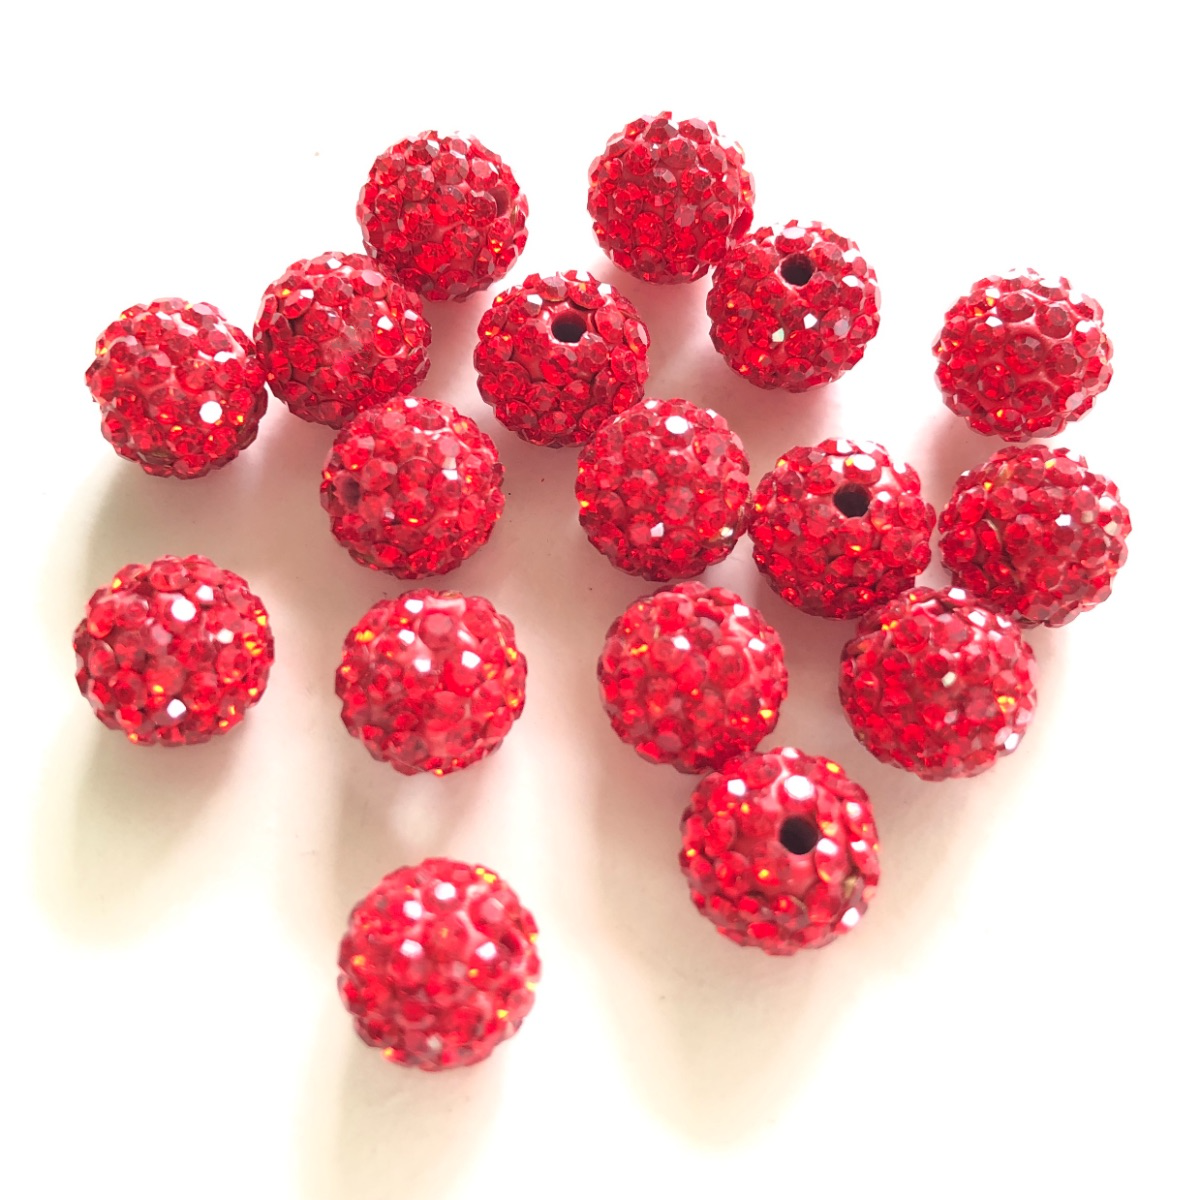 50-100pcs/lot 10mm Red Rhinestone Clay Disco Ball Beads Clay Beads Charms Beads Beyond